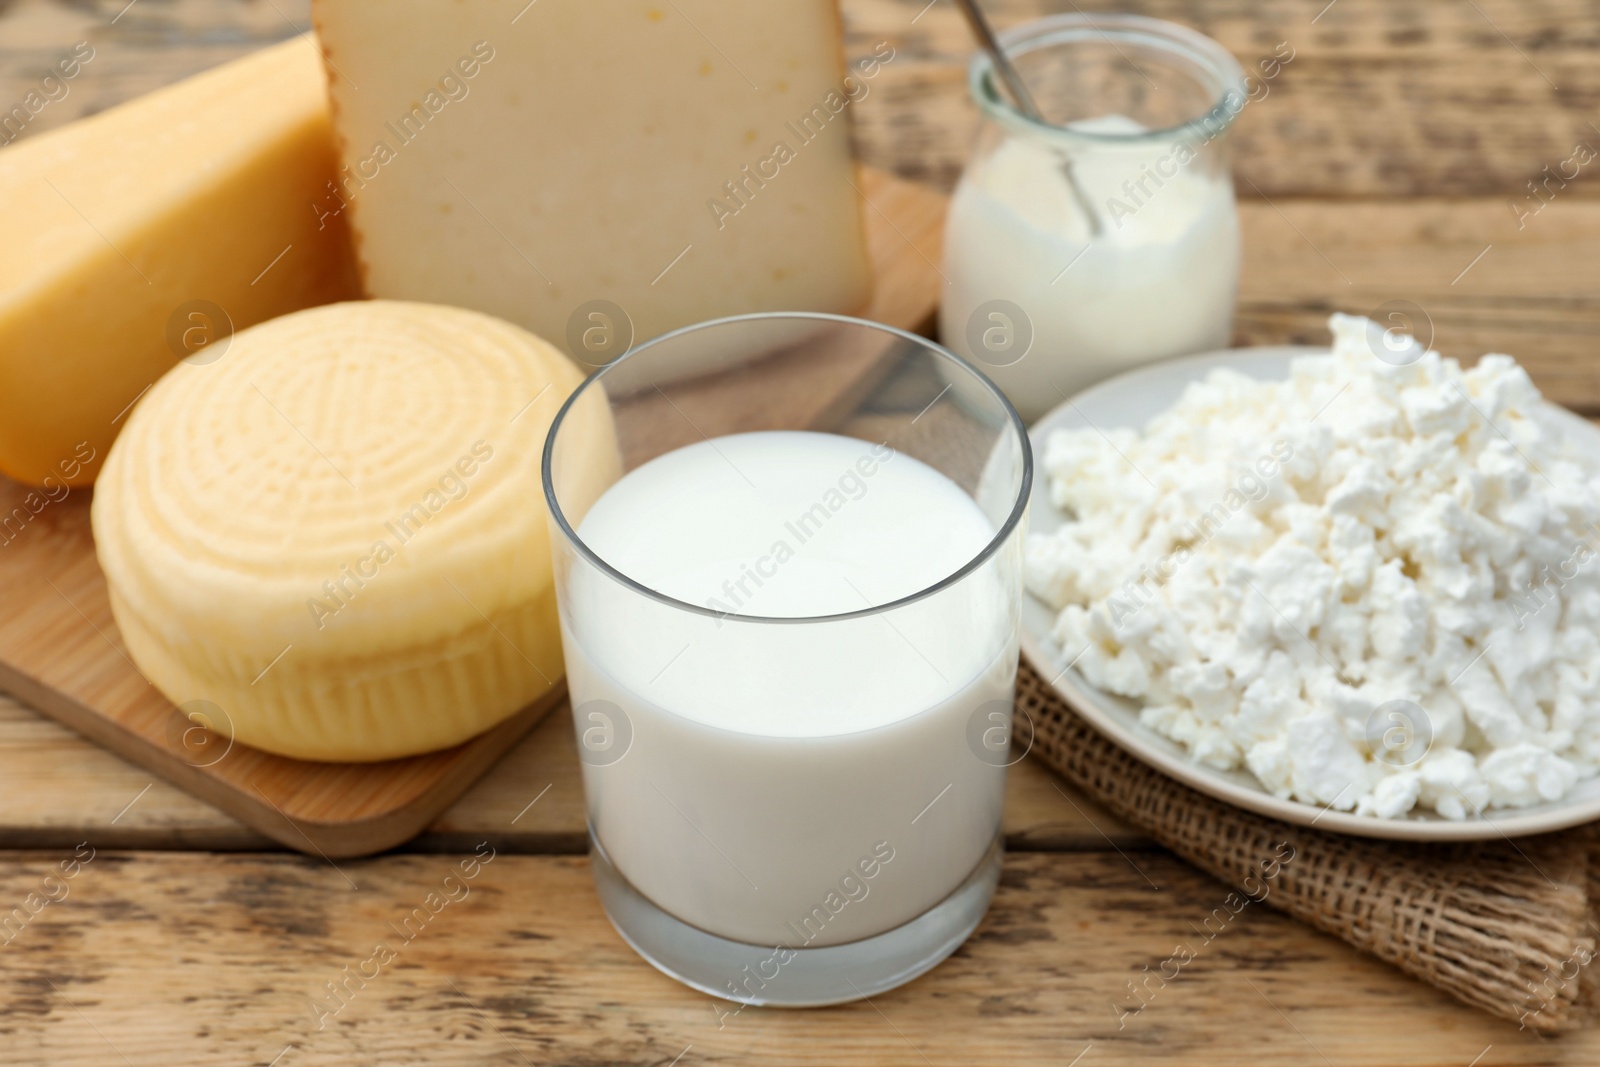 Photo of Tasty cottage cheese and other fresh dairy products on wooden table